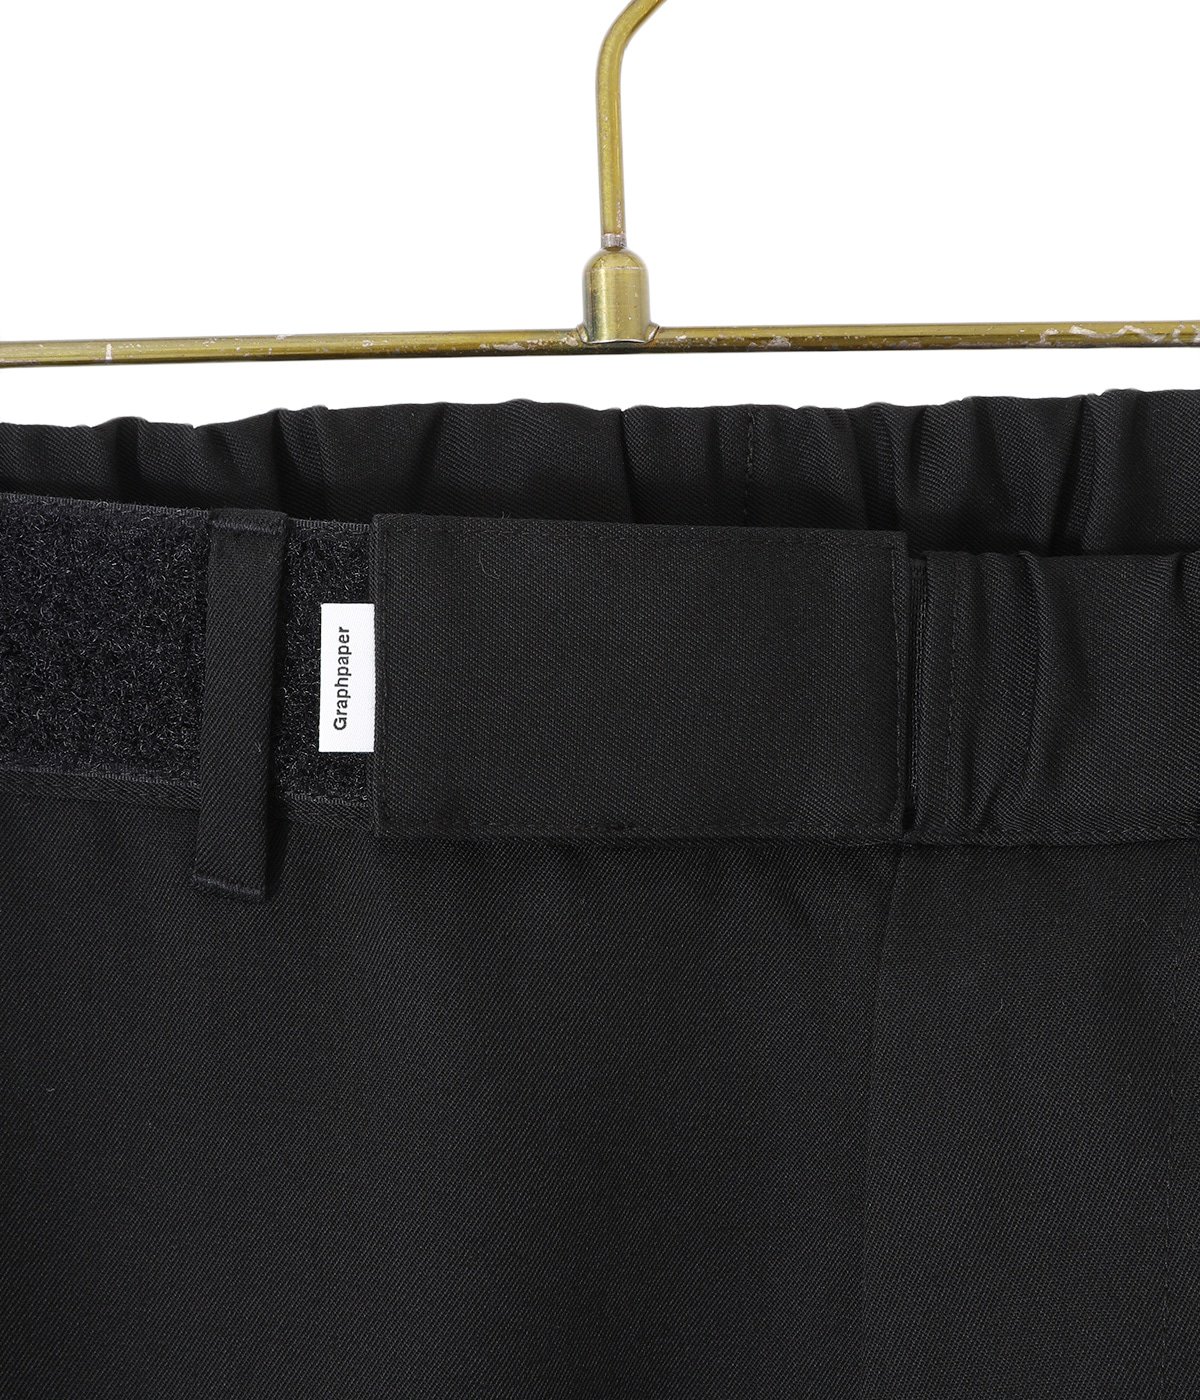 Scale Off Wool Chef Pants